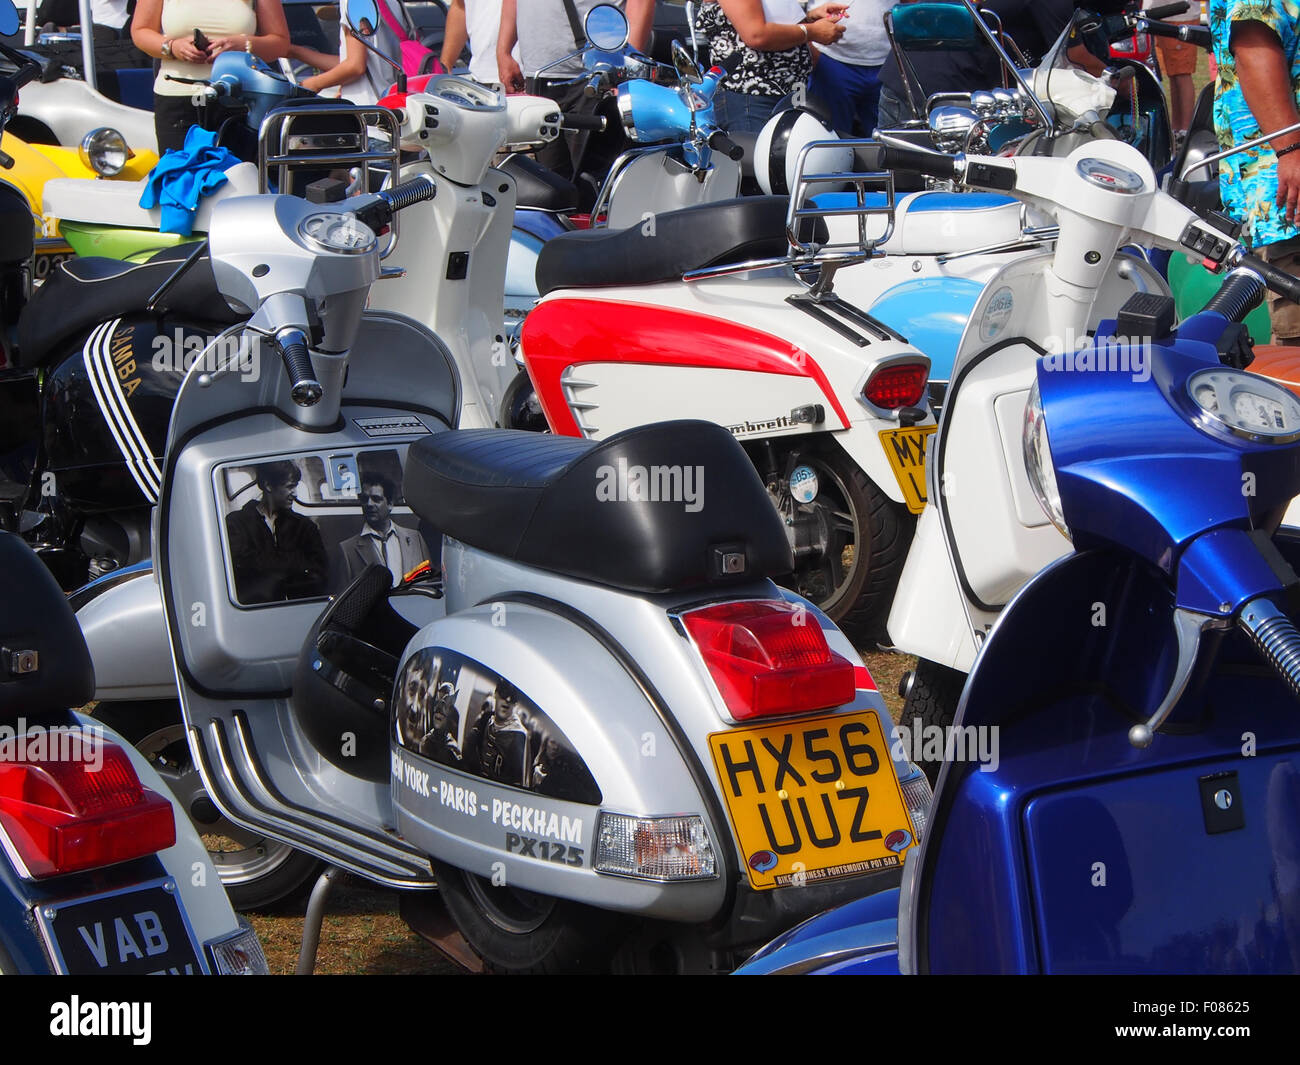 Scooters at a scooter rally Stock Photo